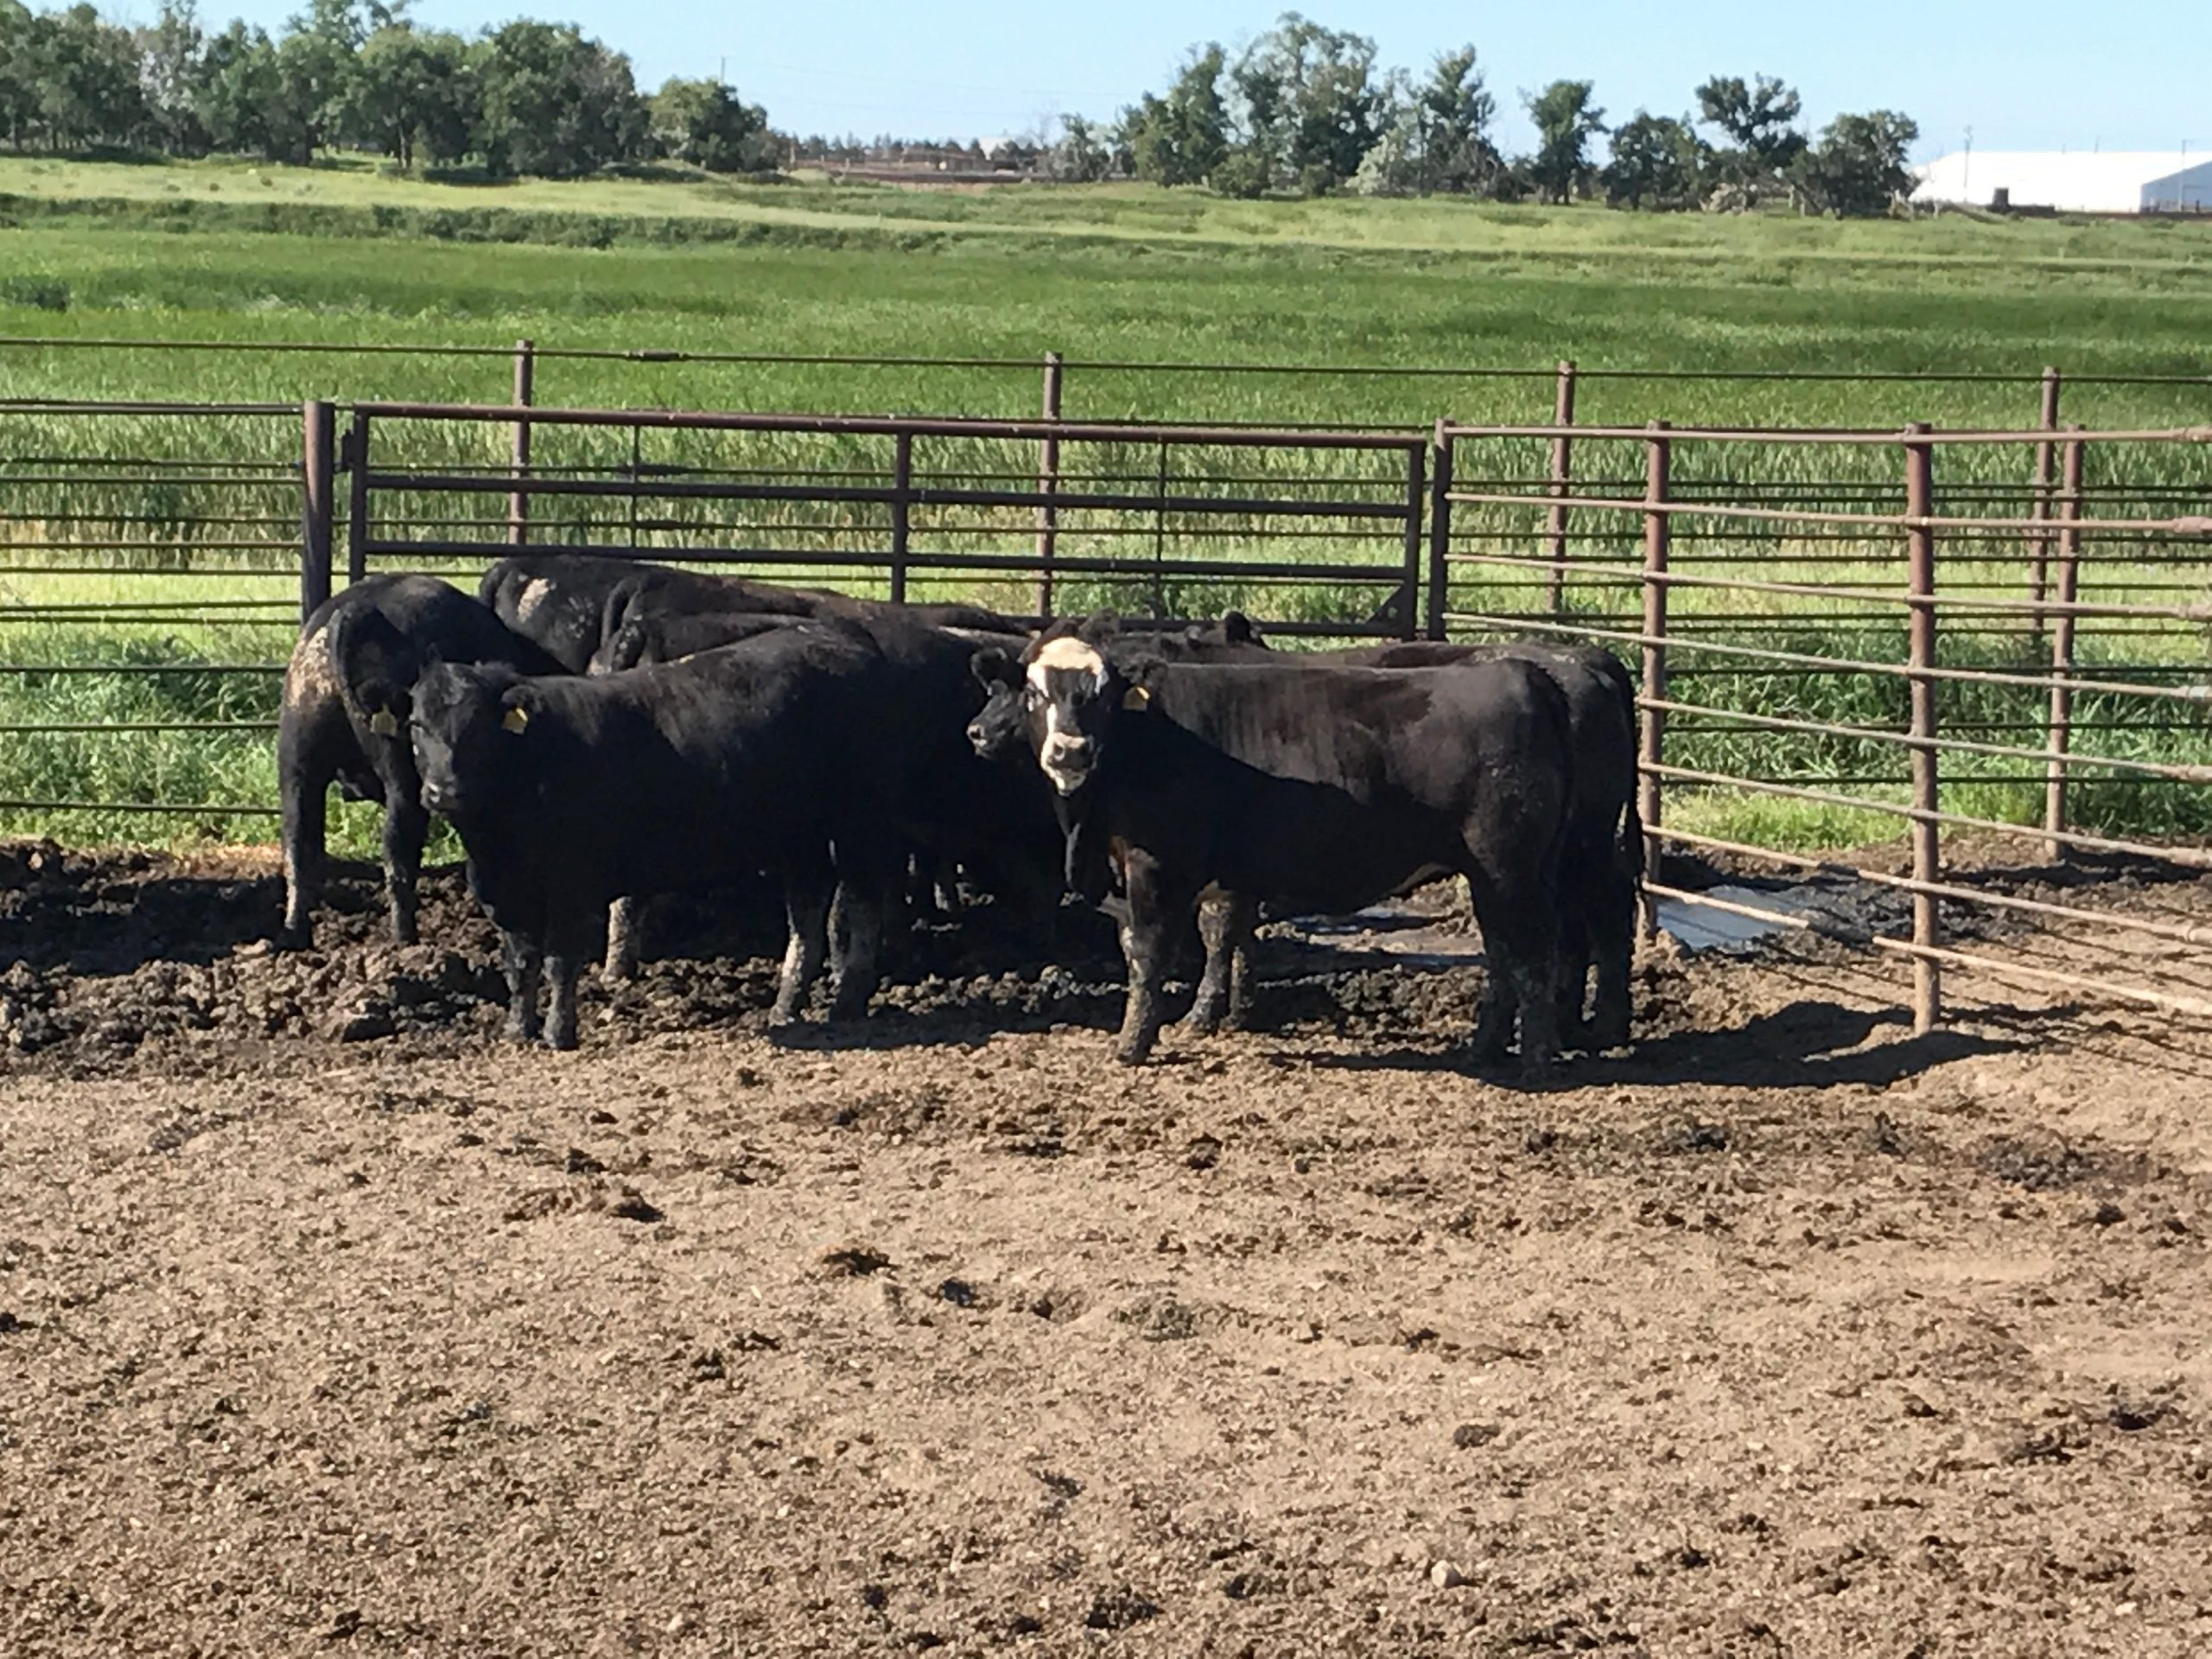 Monday Afternoon Ag News, Jan 25  2021:  Beef Industry Shifts Promotion Focus during Pandemic